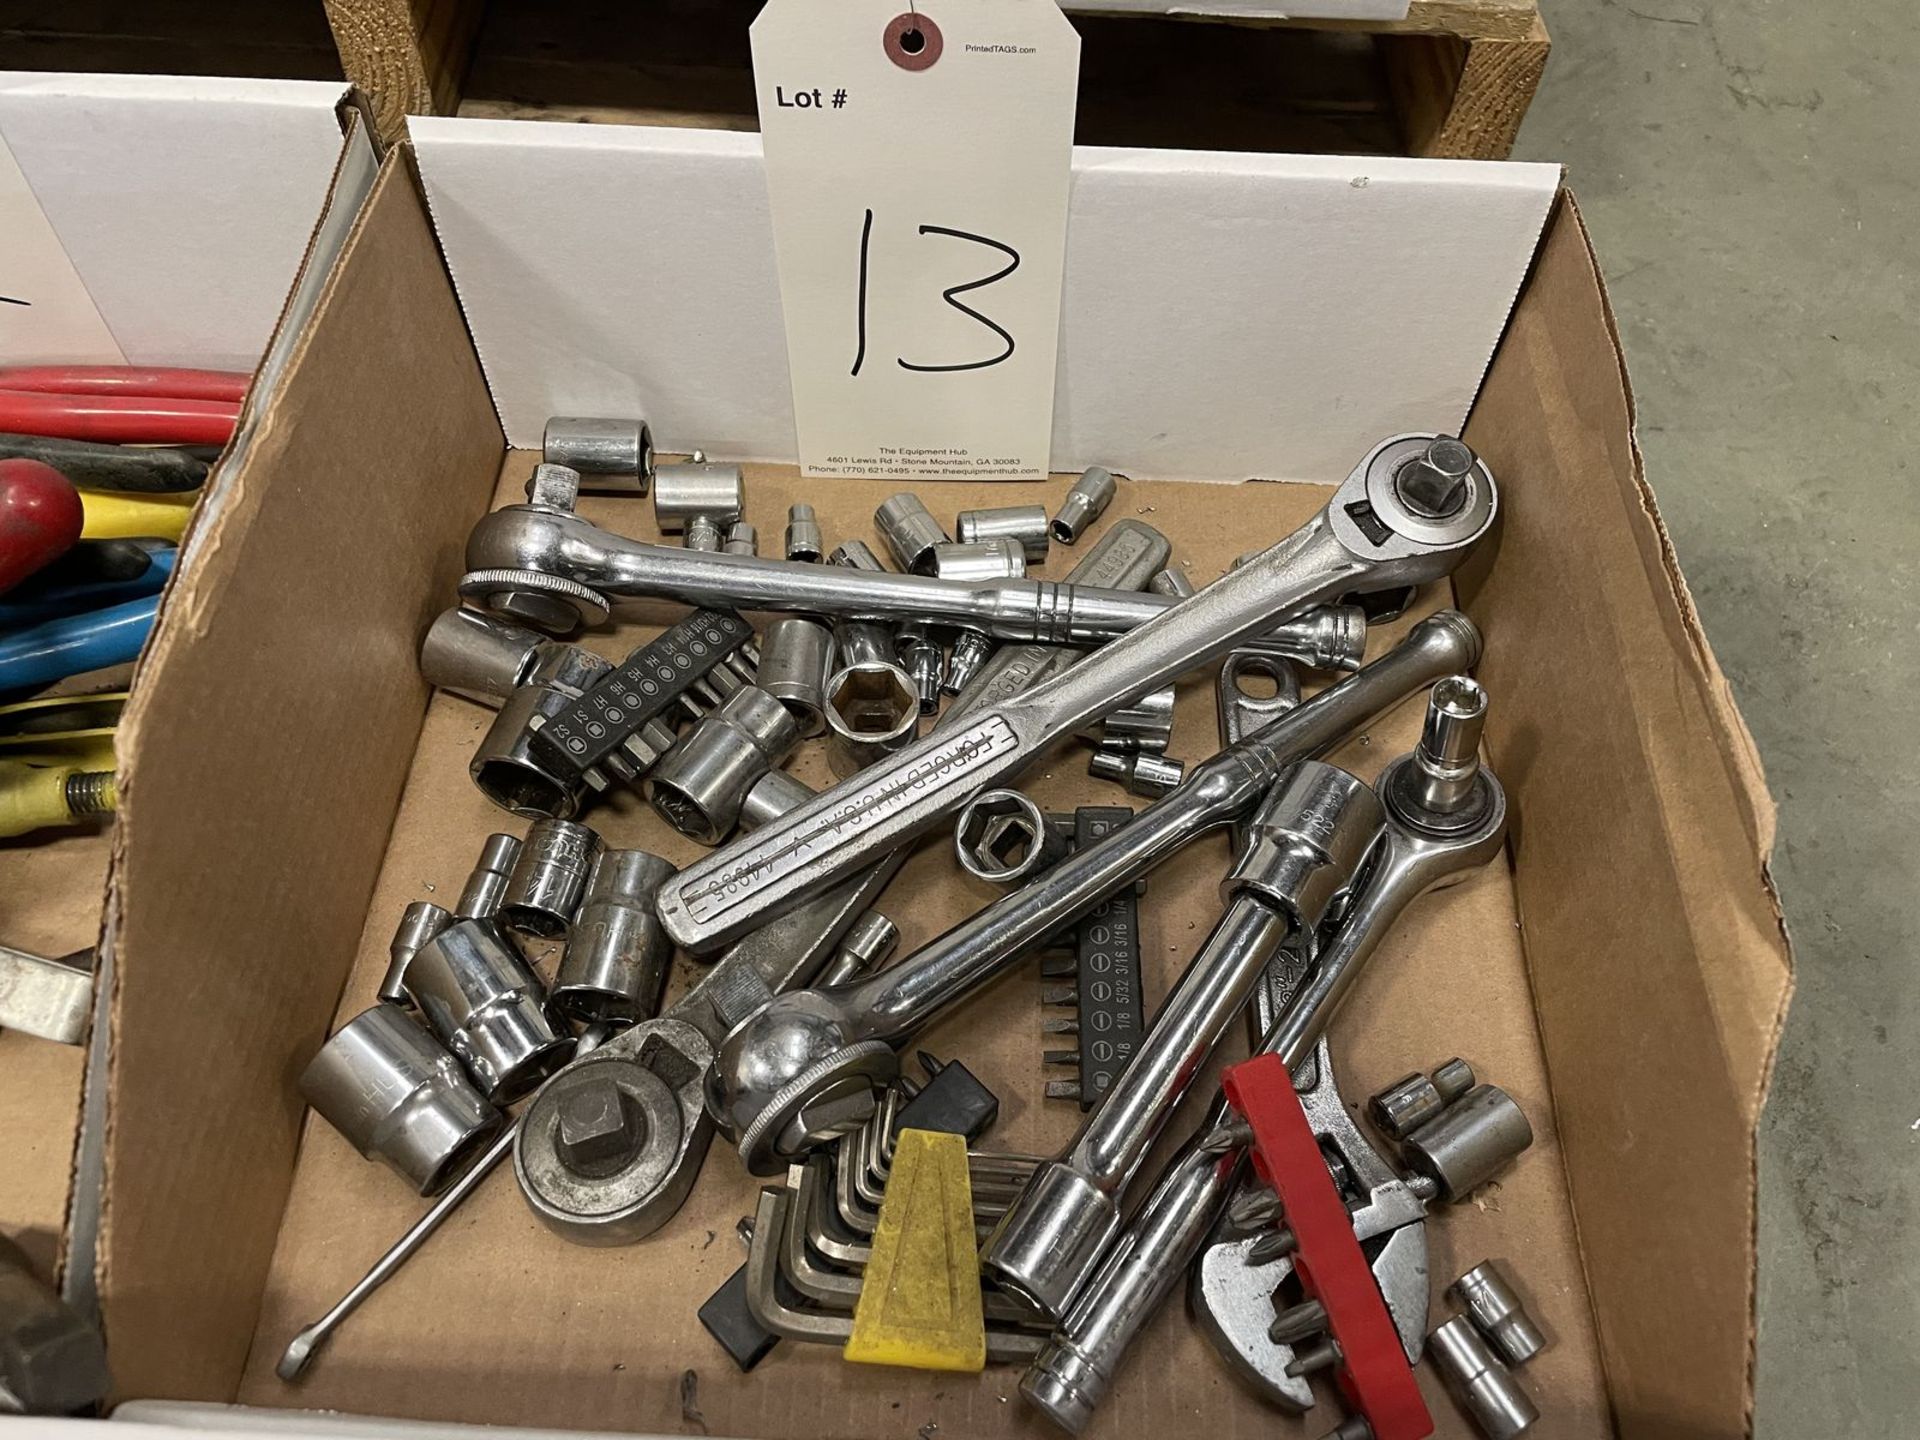 Assortment of Socket Wrenches, Sockets, Allen Wrenches and Screw Bits